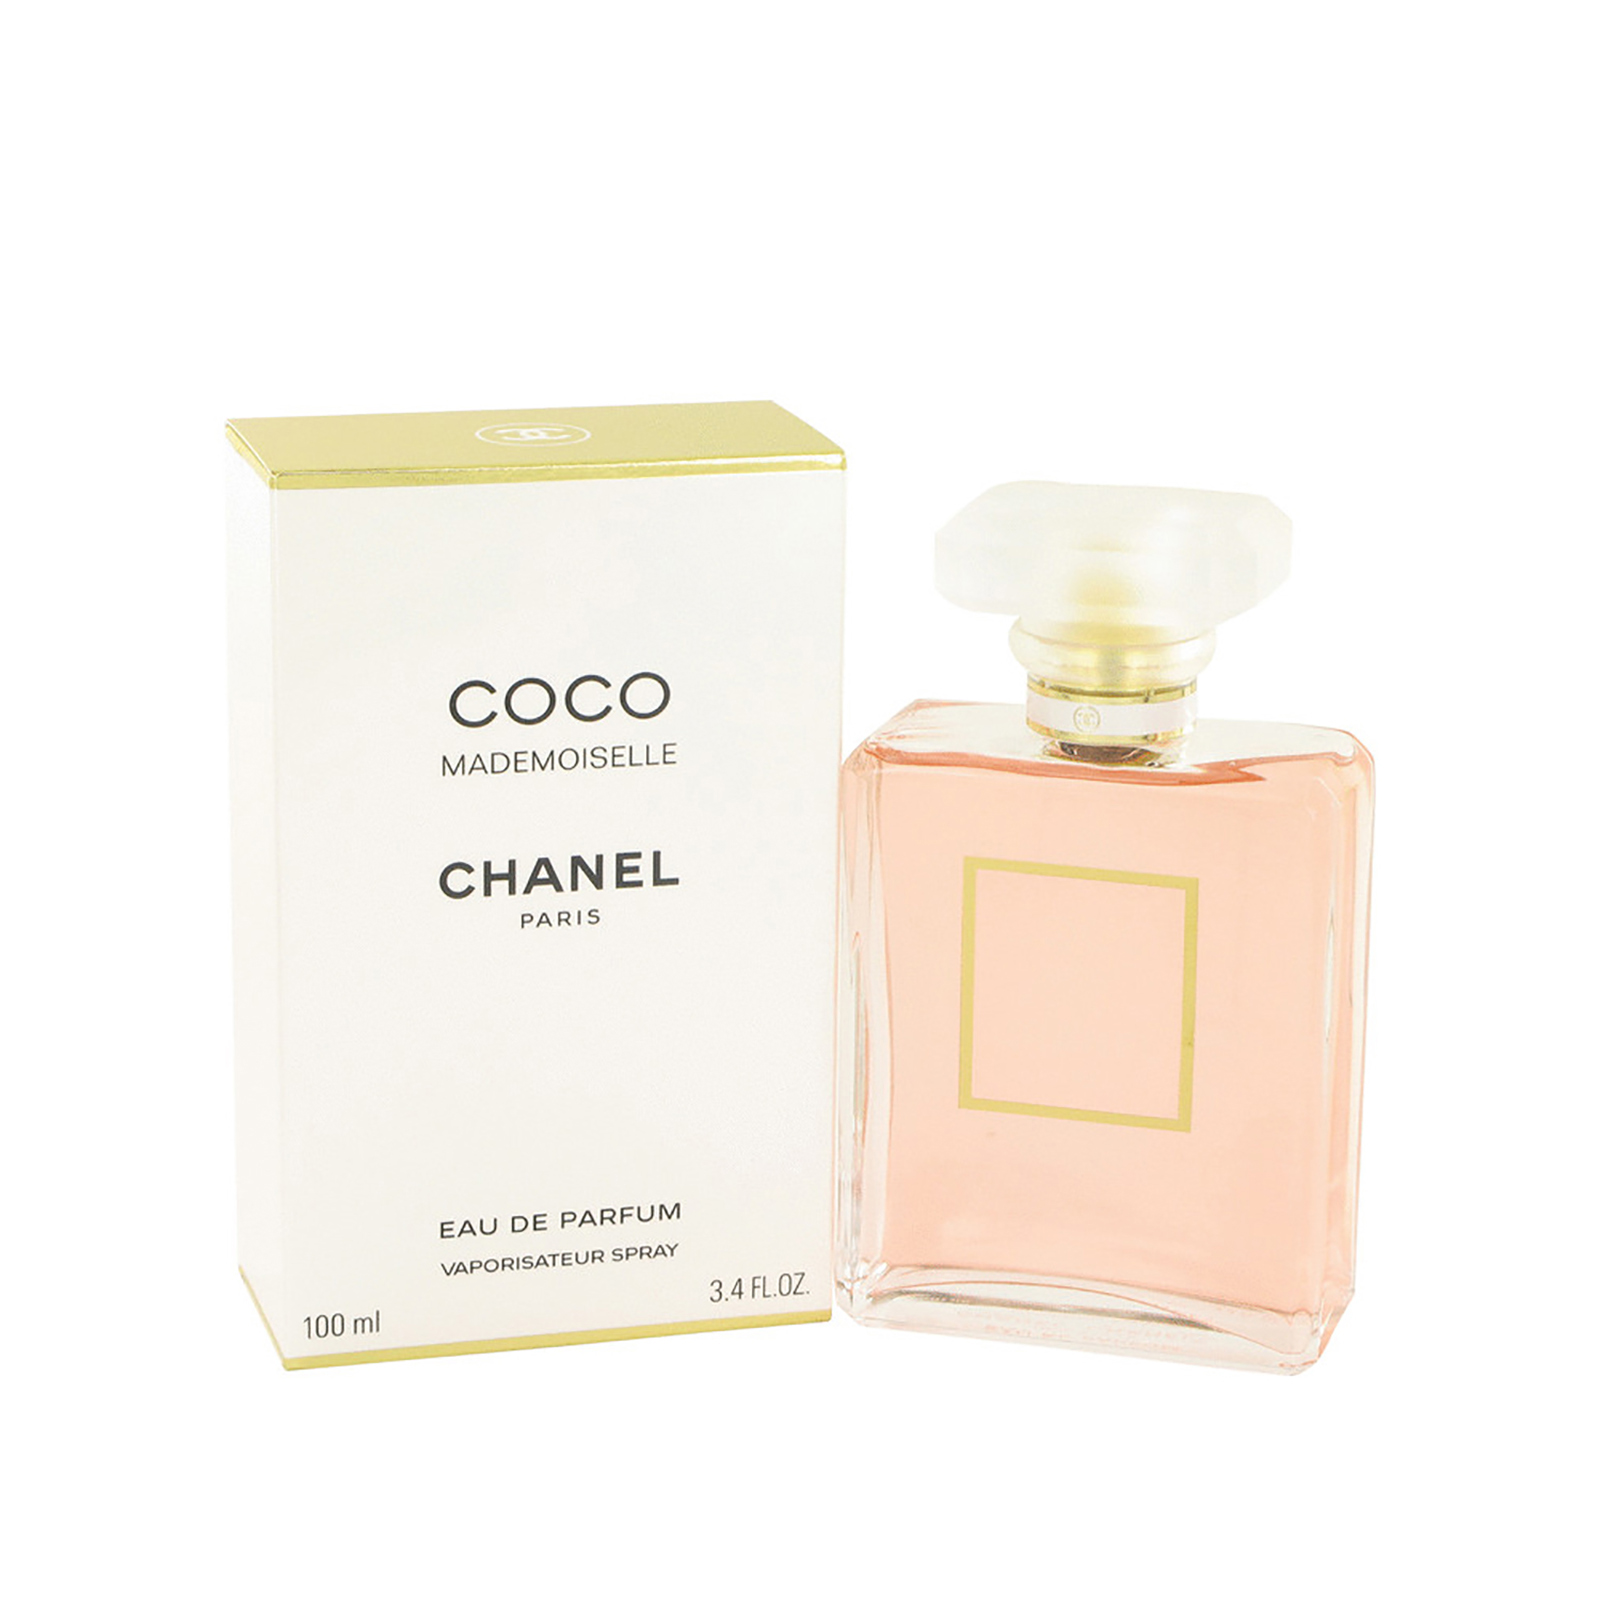 coco mademoiselle by chanel 3.4 parfum